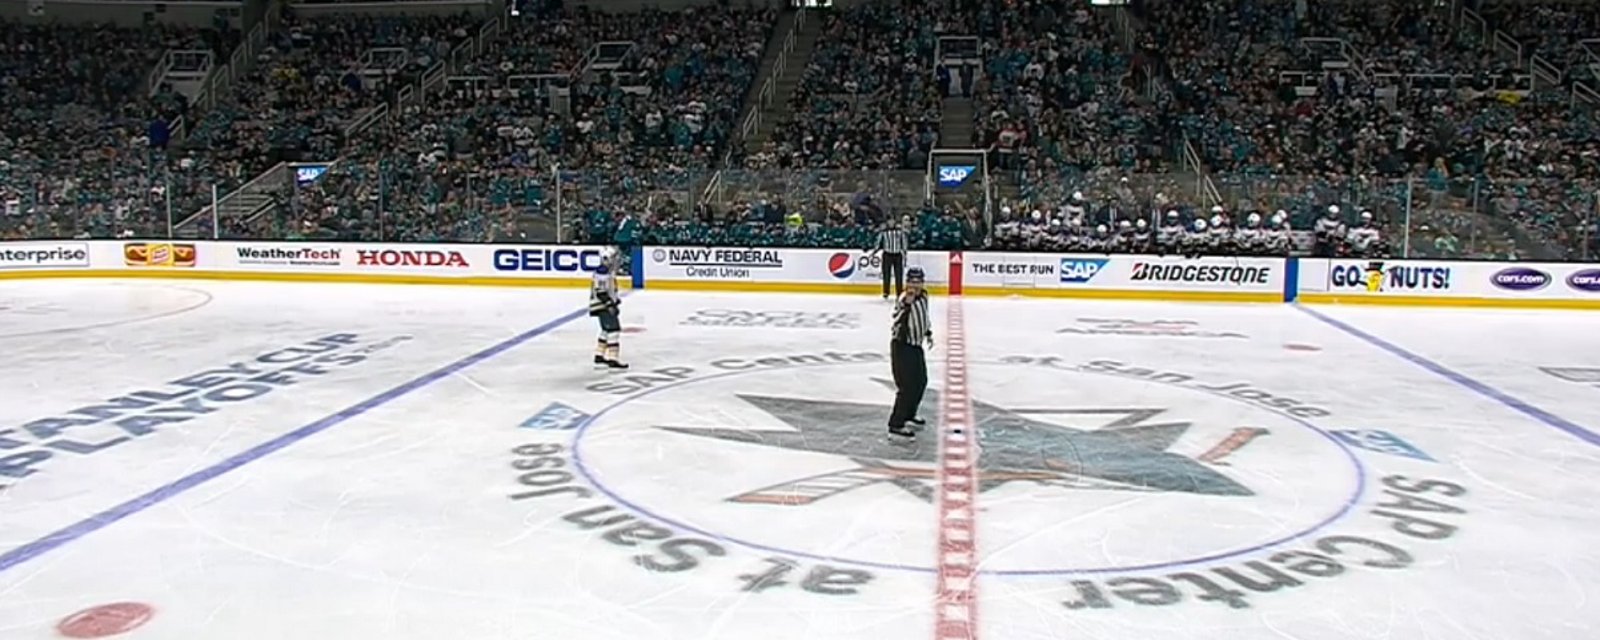 Tarasenko gets a penalty shot in Game 5 of the Western Conference Final!